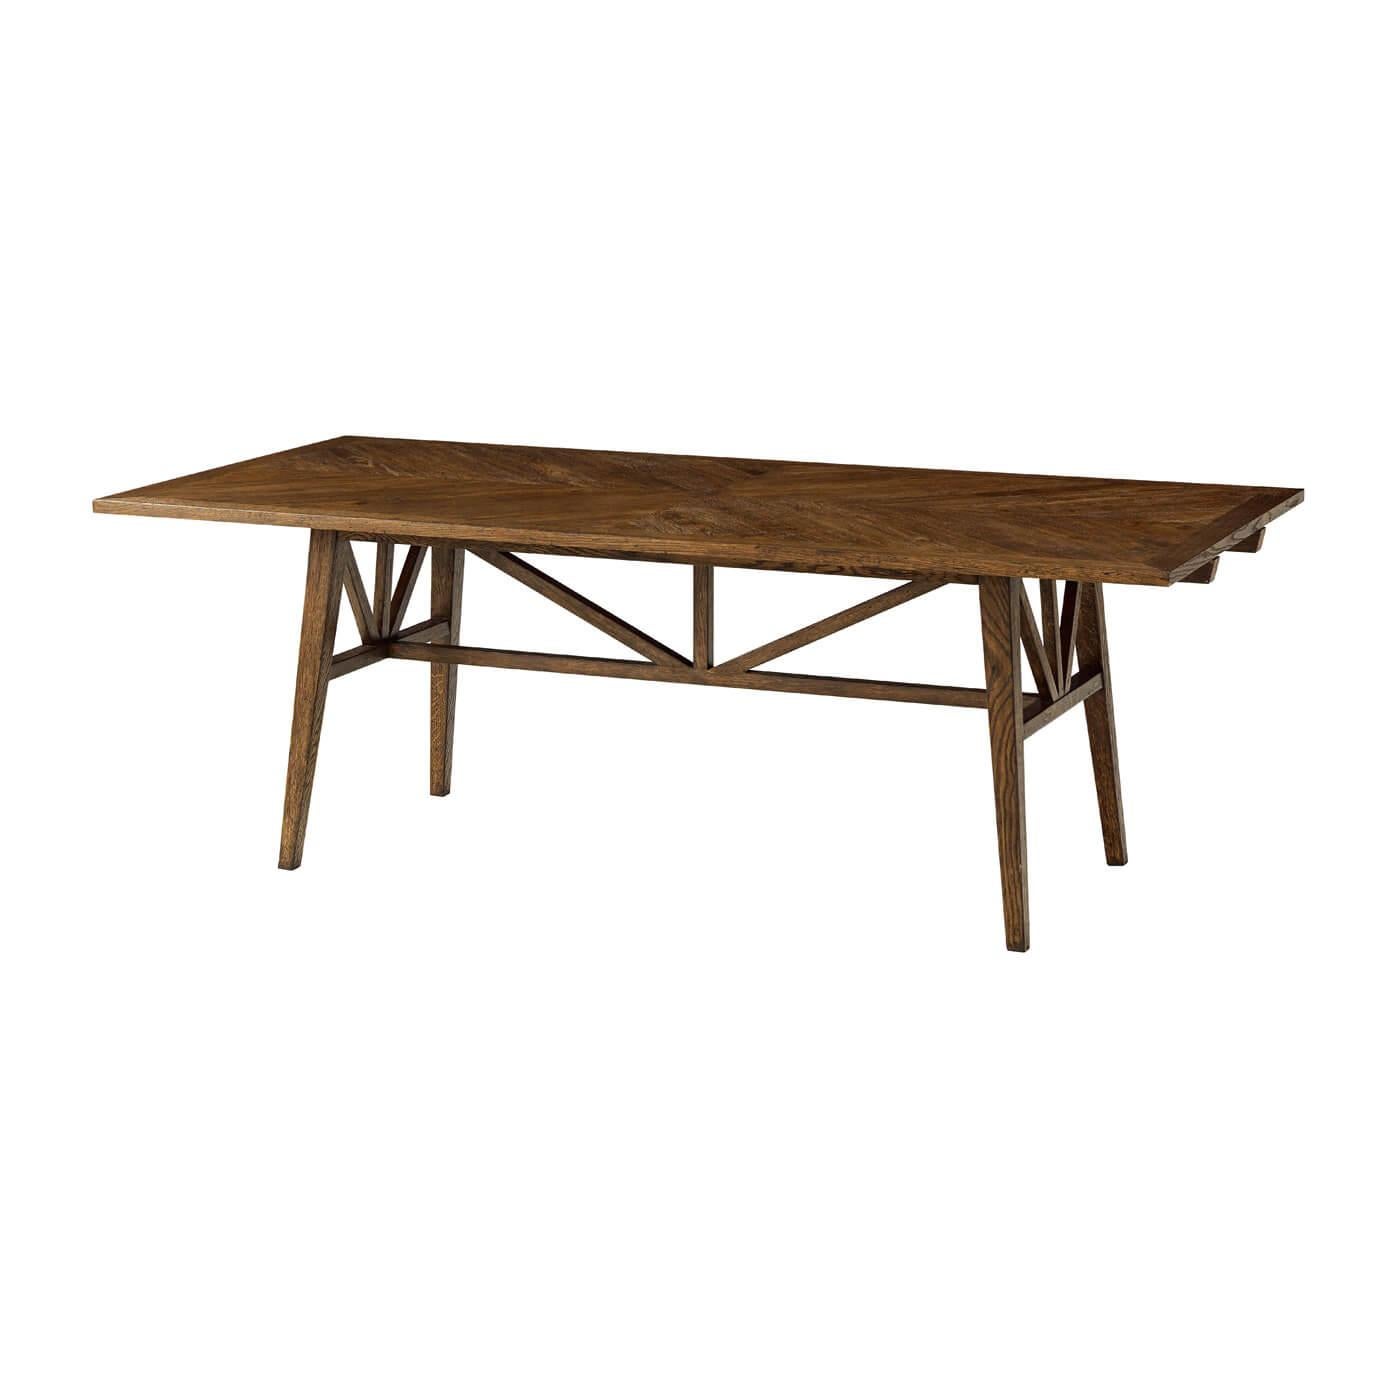 A dark oak parquetry extending dining table with finely tapered oak legs. This beautiful table is crafted from rustic oak with a herringbone parquetry design. It offers two extension leaves and over a flat truss. 
Shown in Dusk